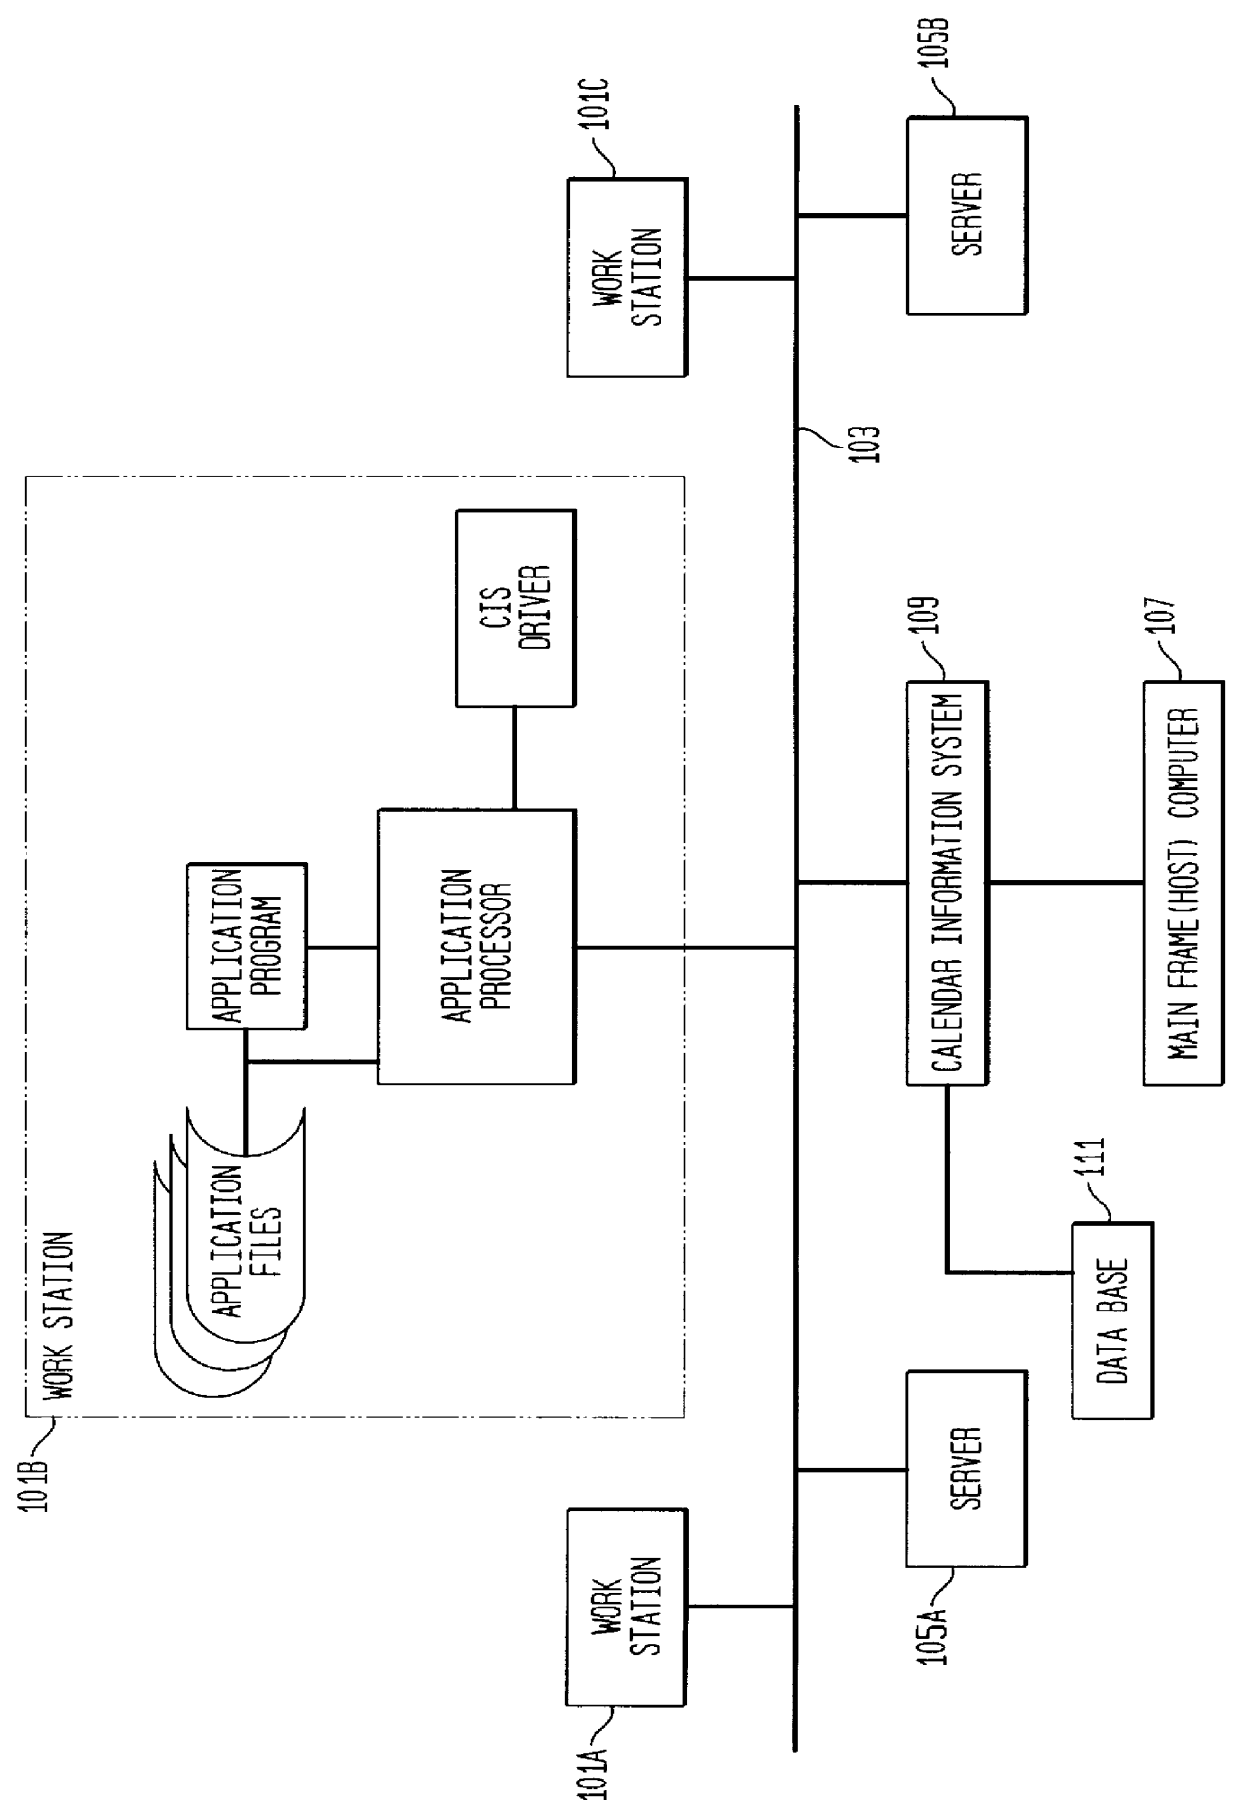 Method for modifying computer system and system resulting therefrom